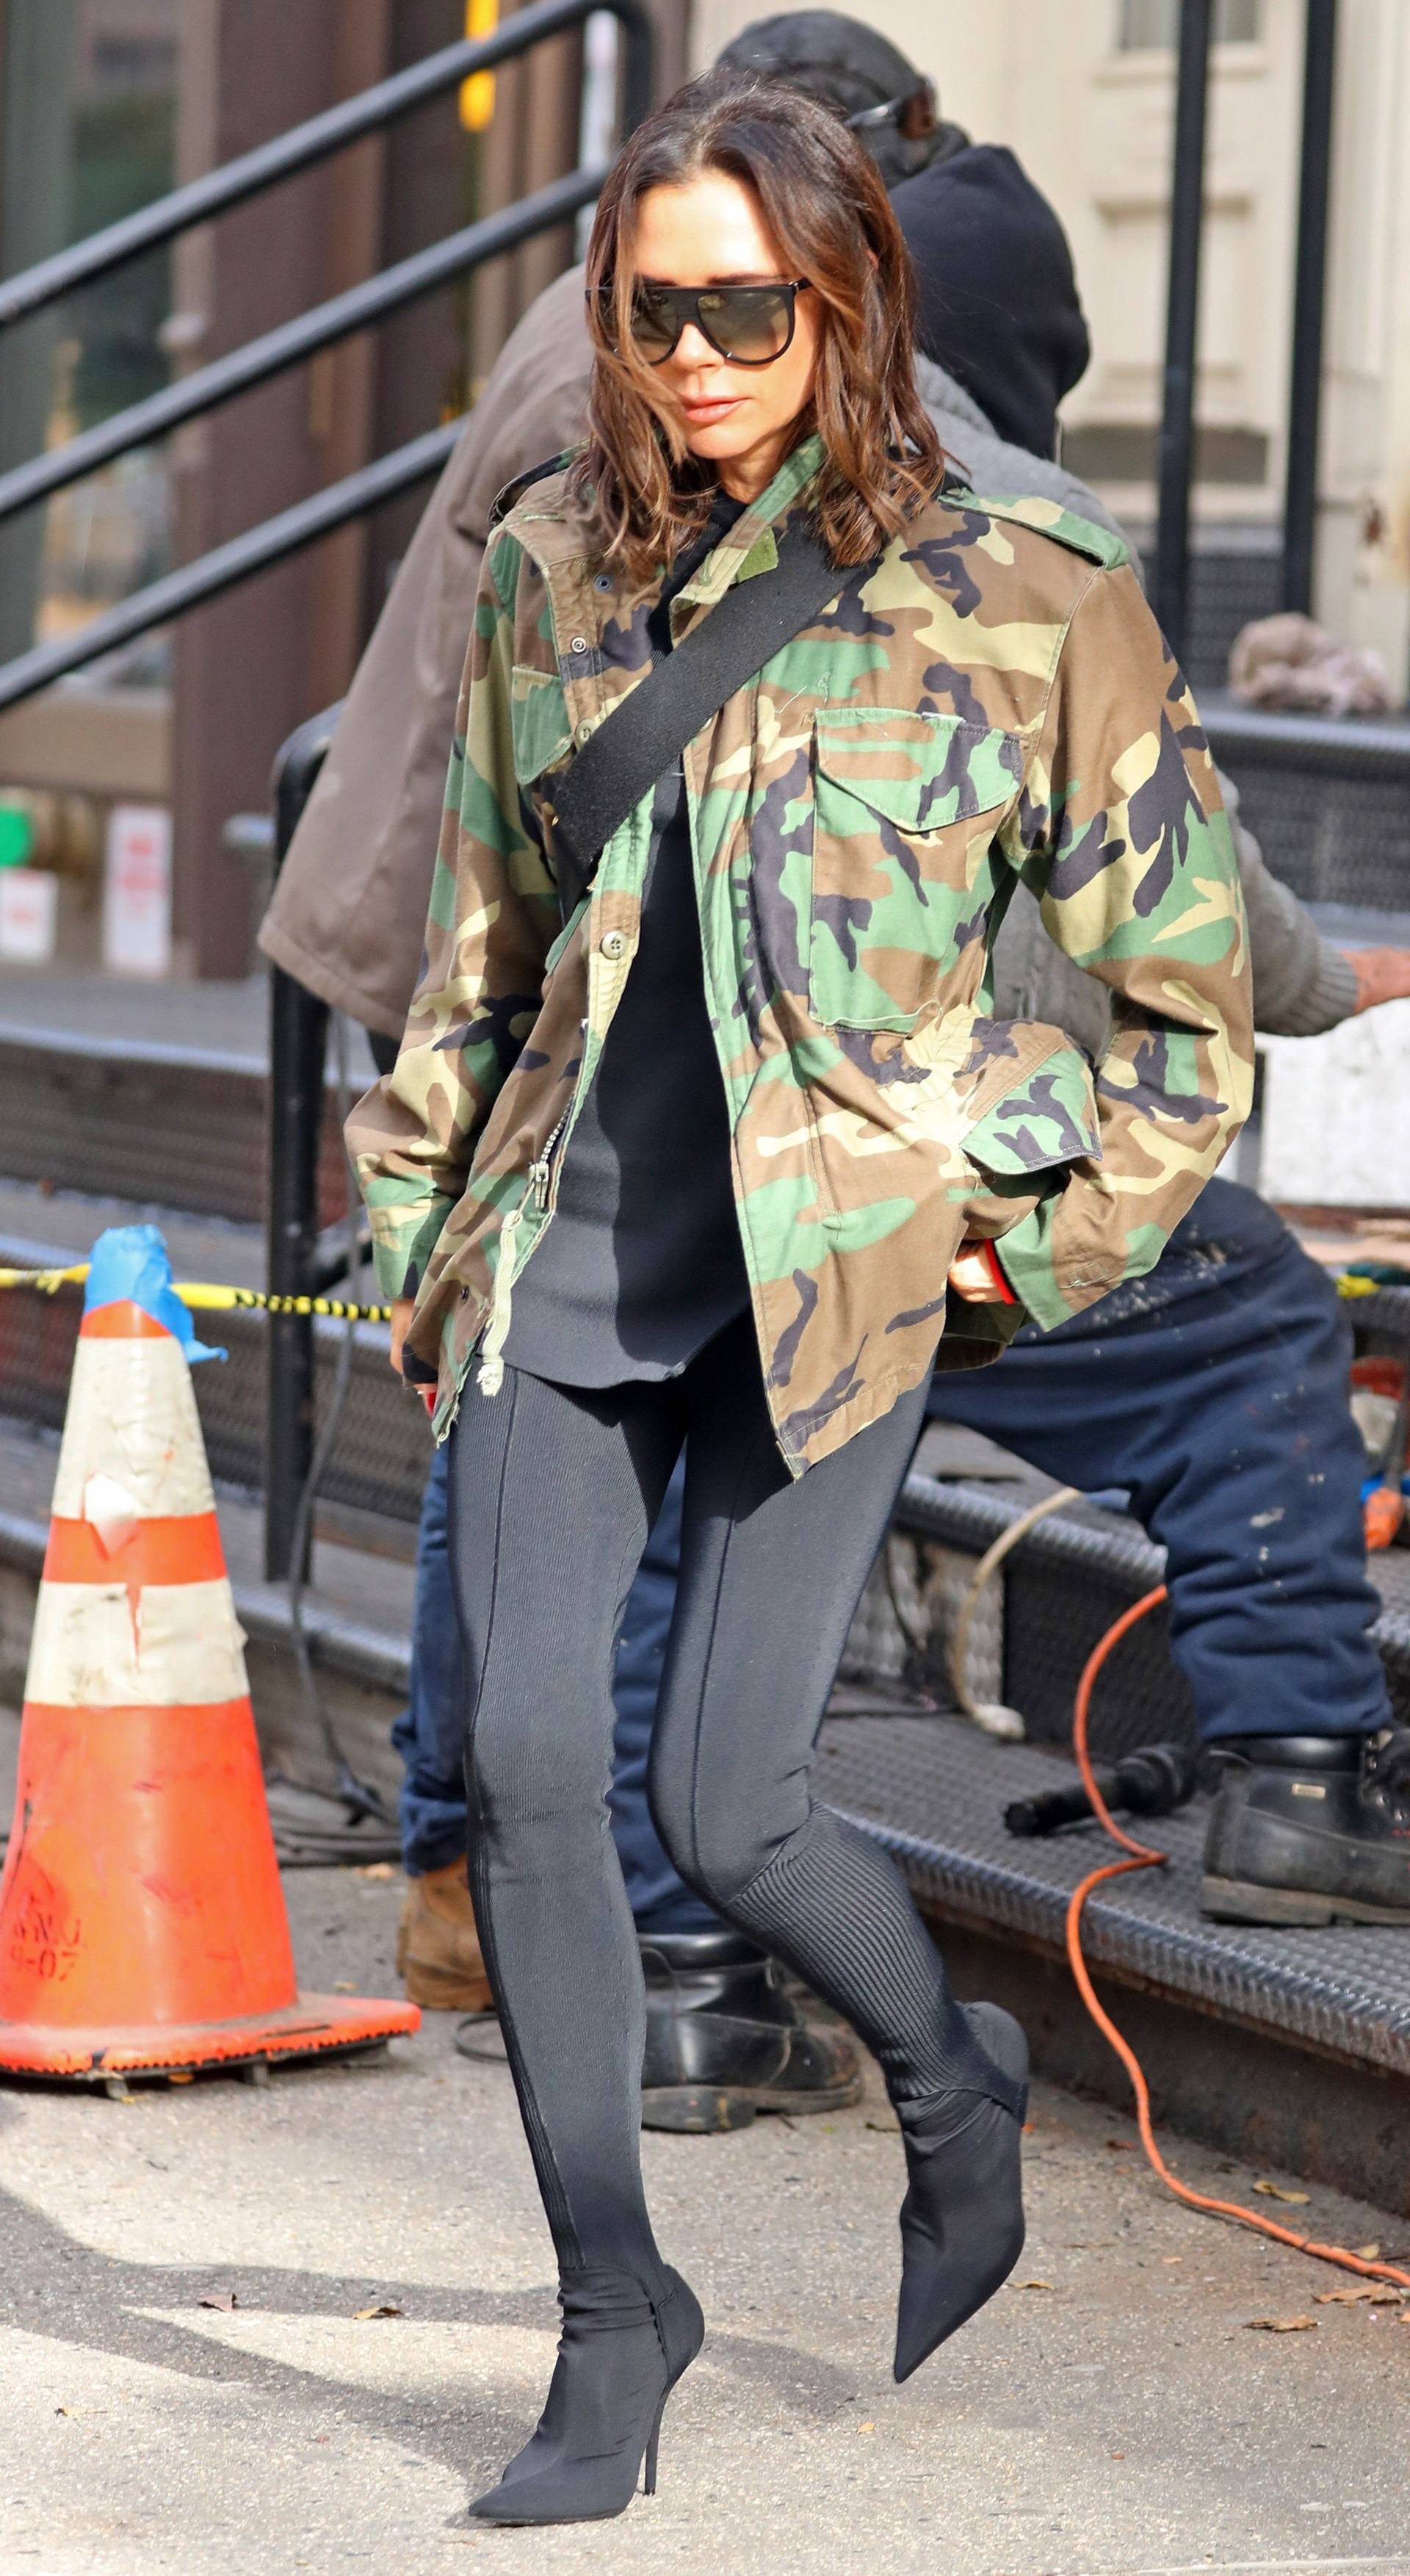 Victoria Beckham steps out wearing a camouflage military jacket and black tights, NYC